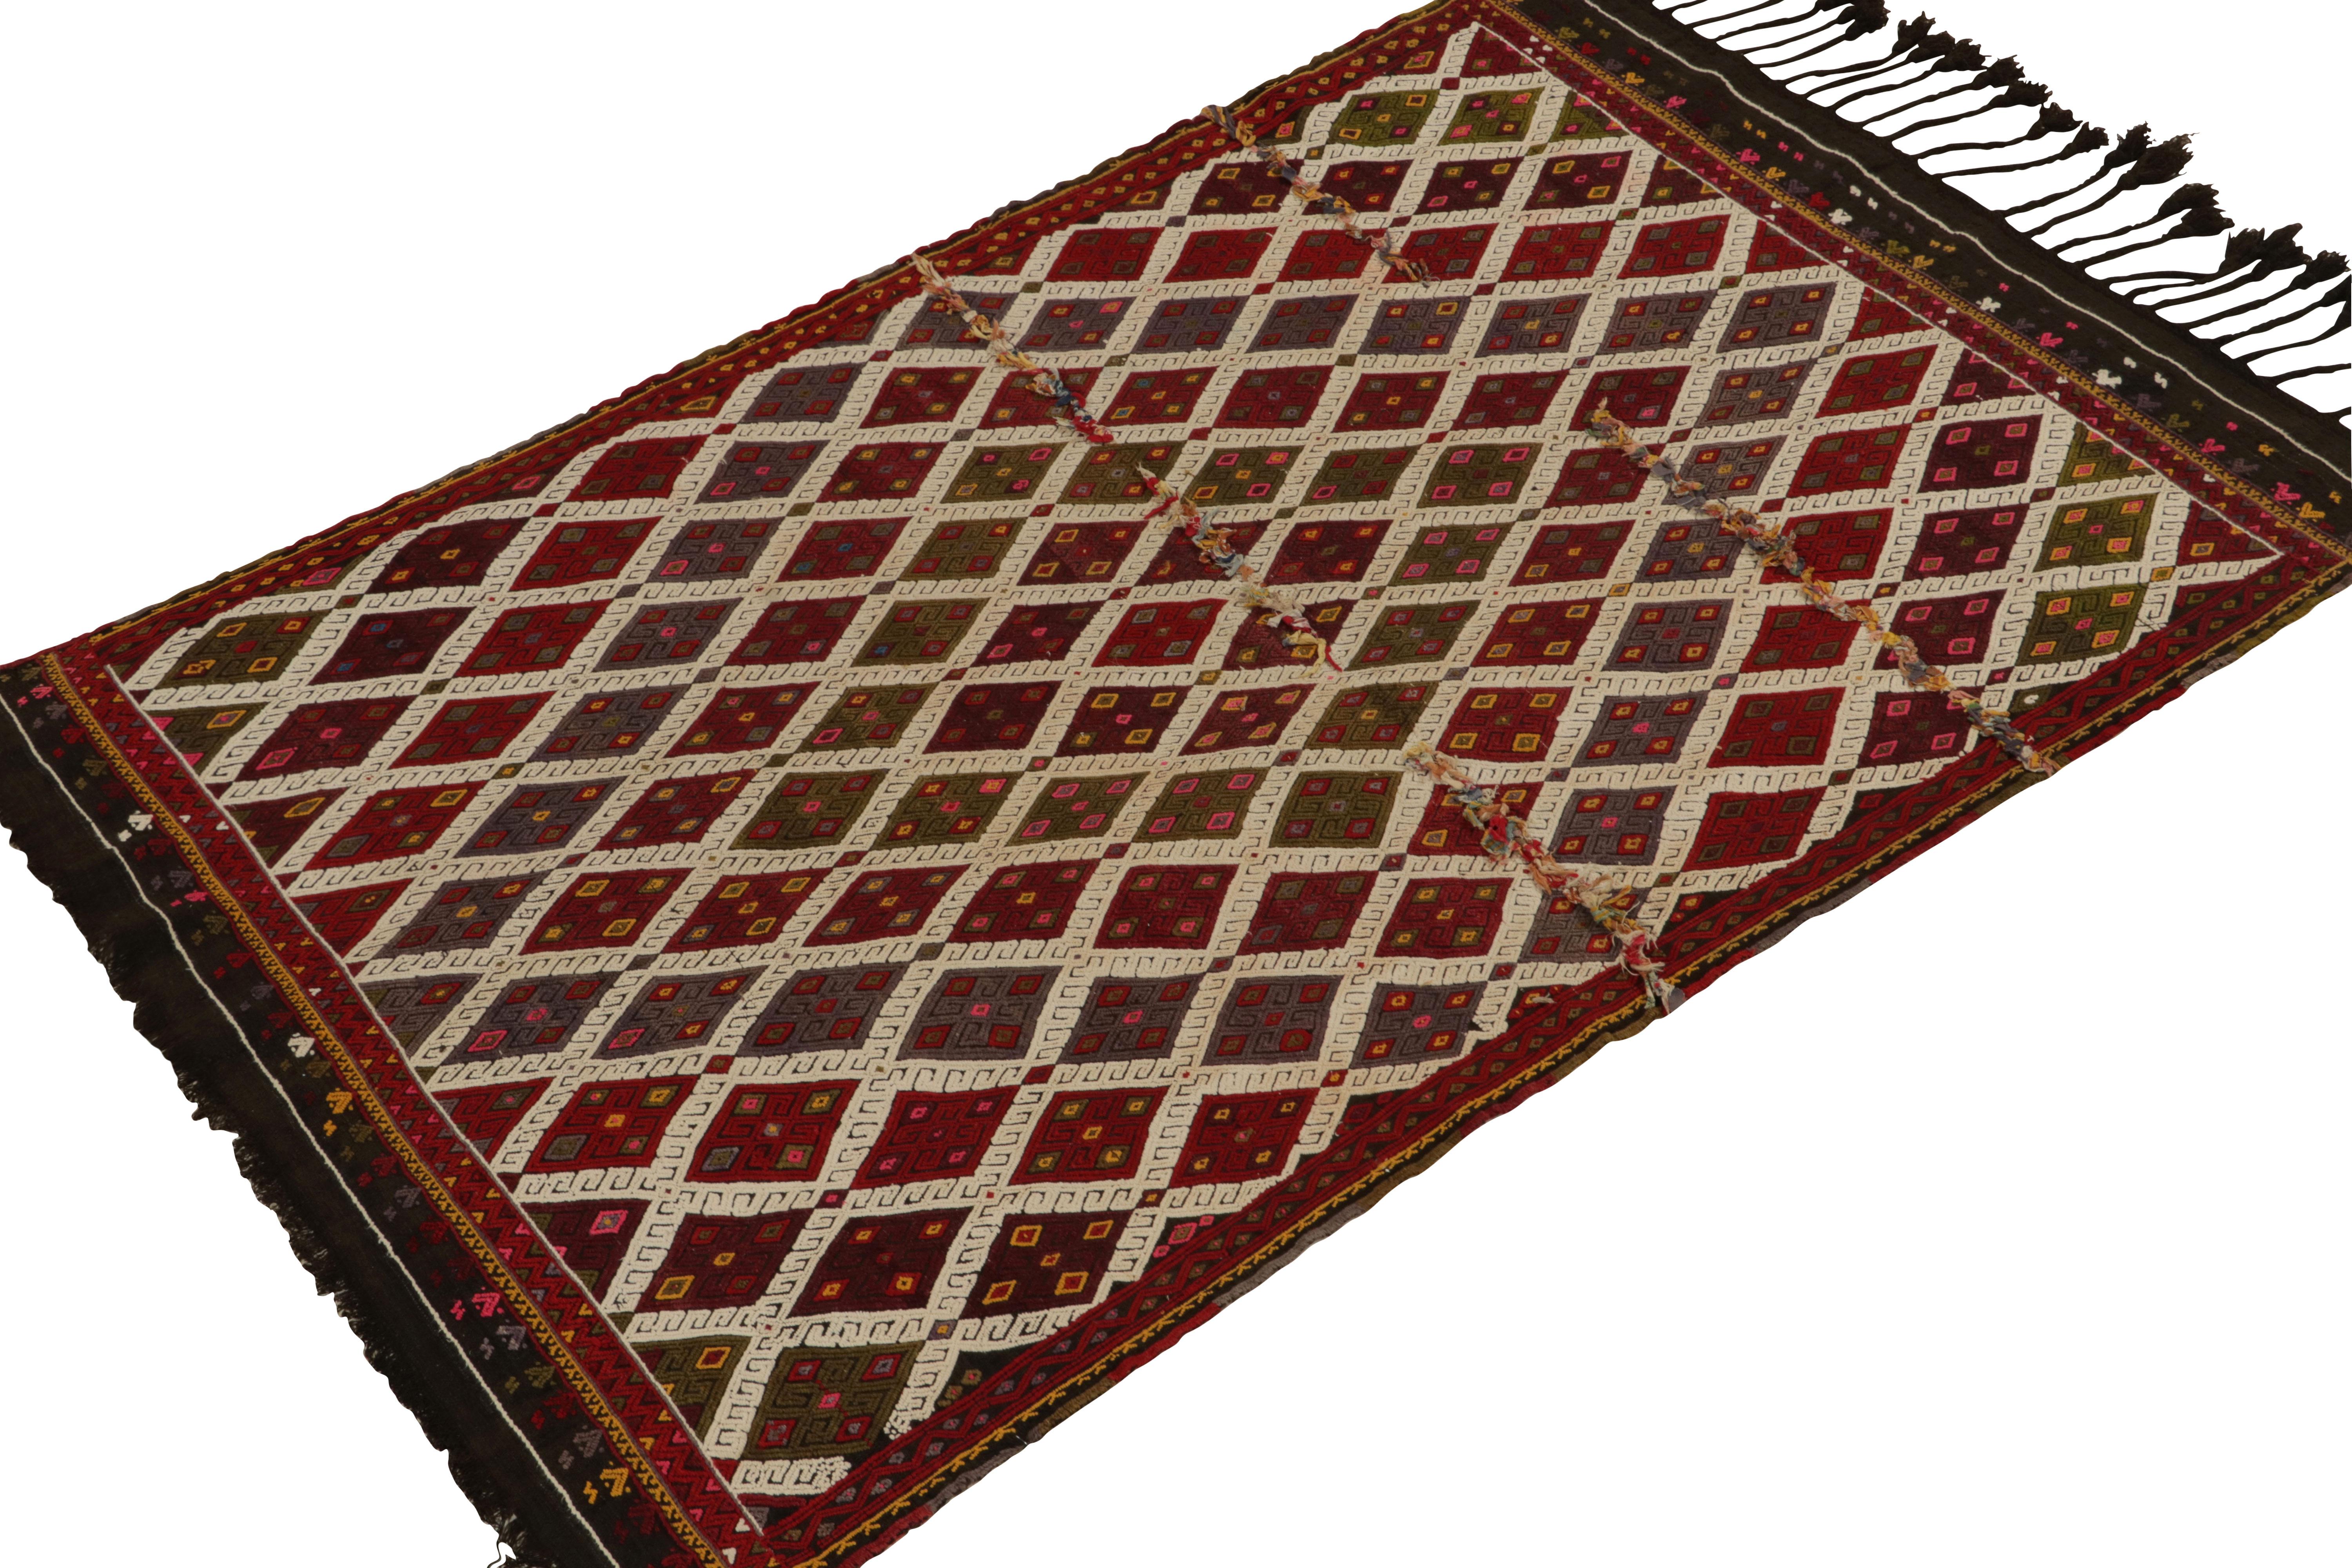 Hand-knotted in wool, a 4x6 vintage Tulu tribal rug drawing on Turkish kilim geometric sensibilities. Originating from Turkey circa 1950s, the midcentury piece enjoys a rich play of mature brown, red, blue & green with white detailing further